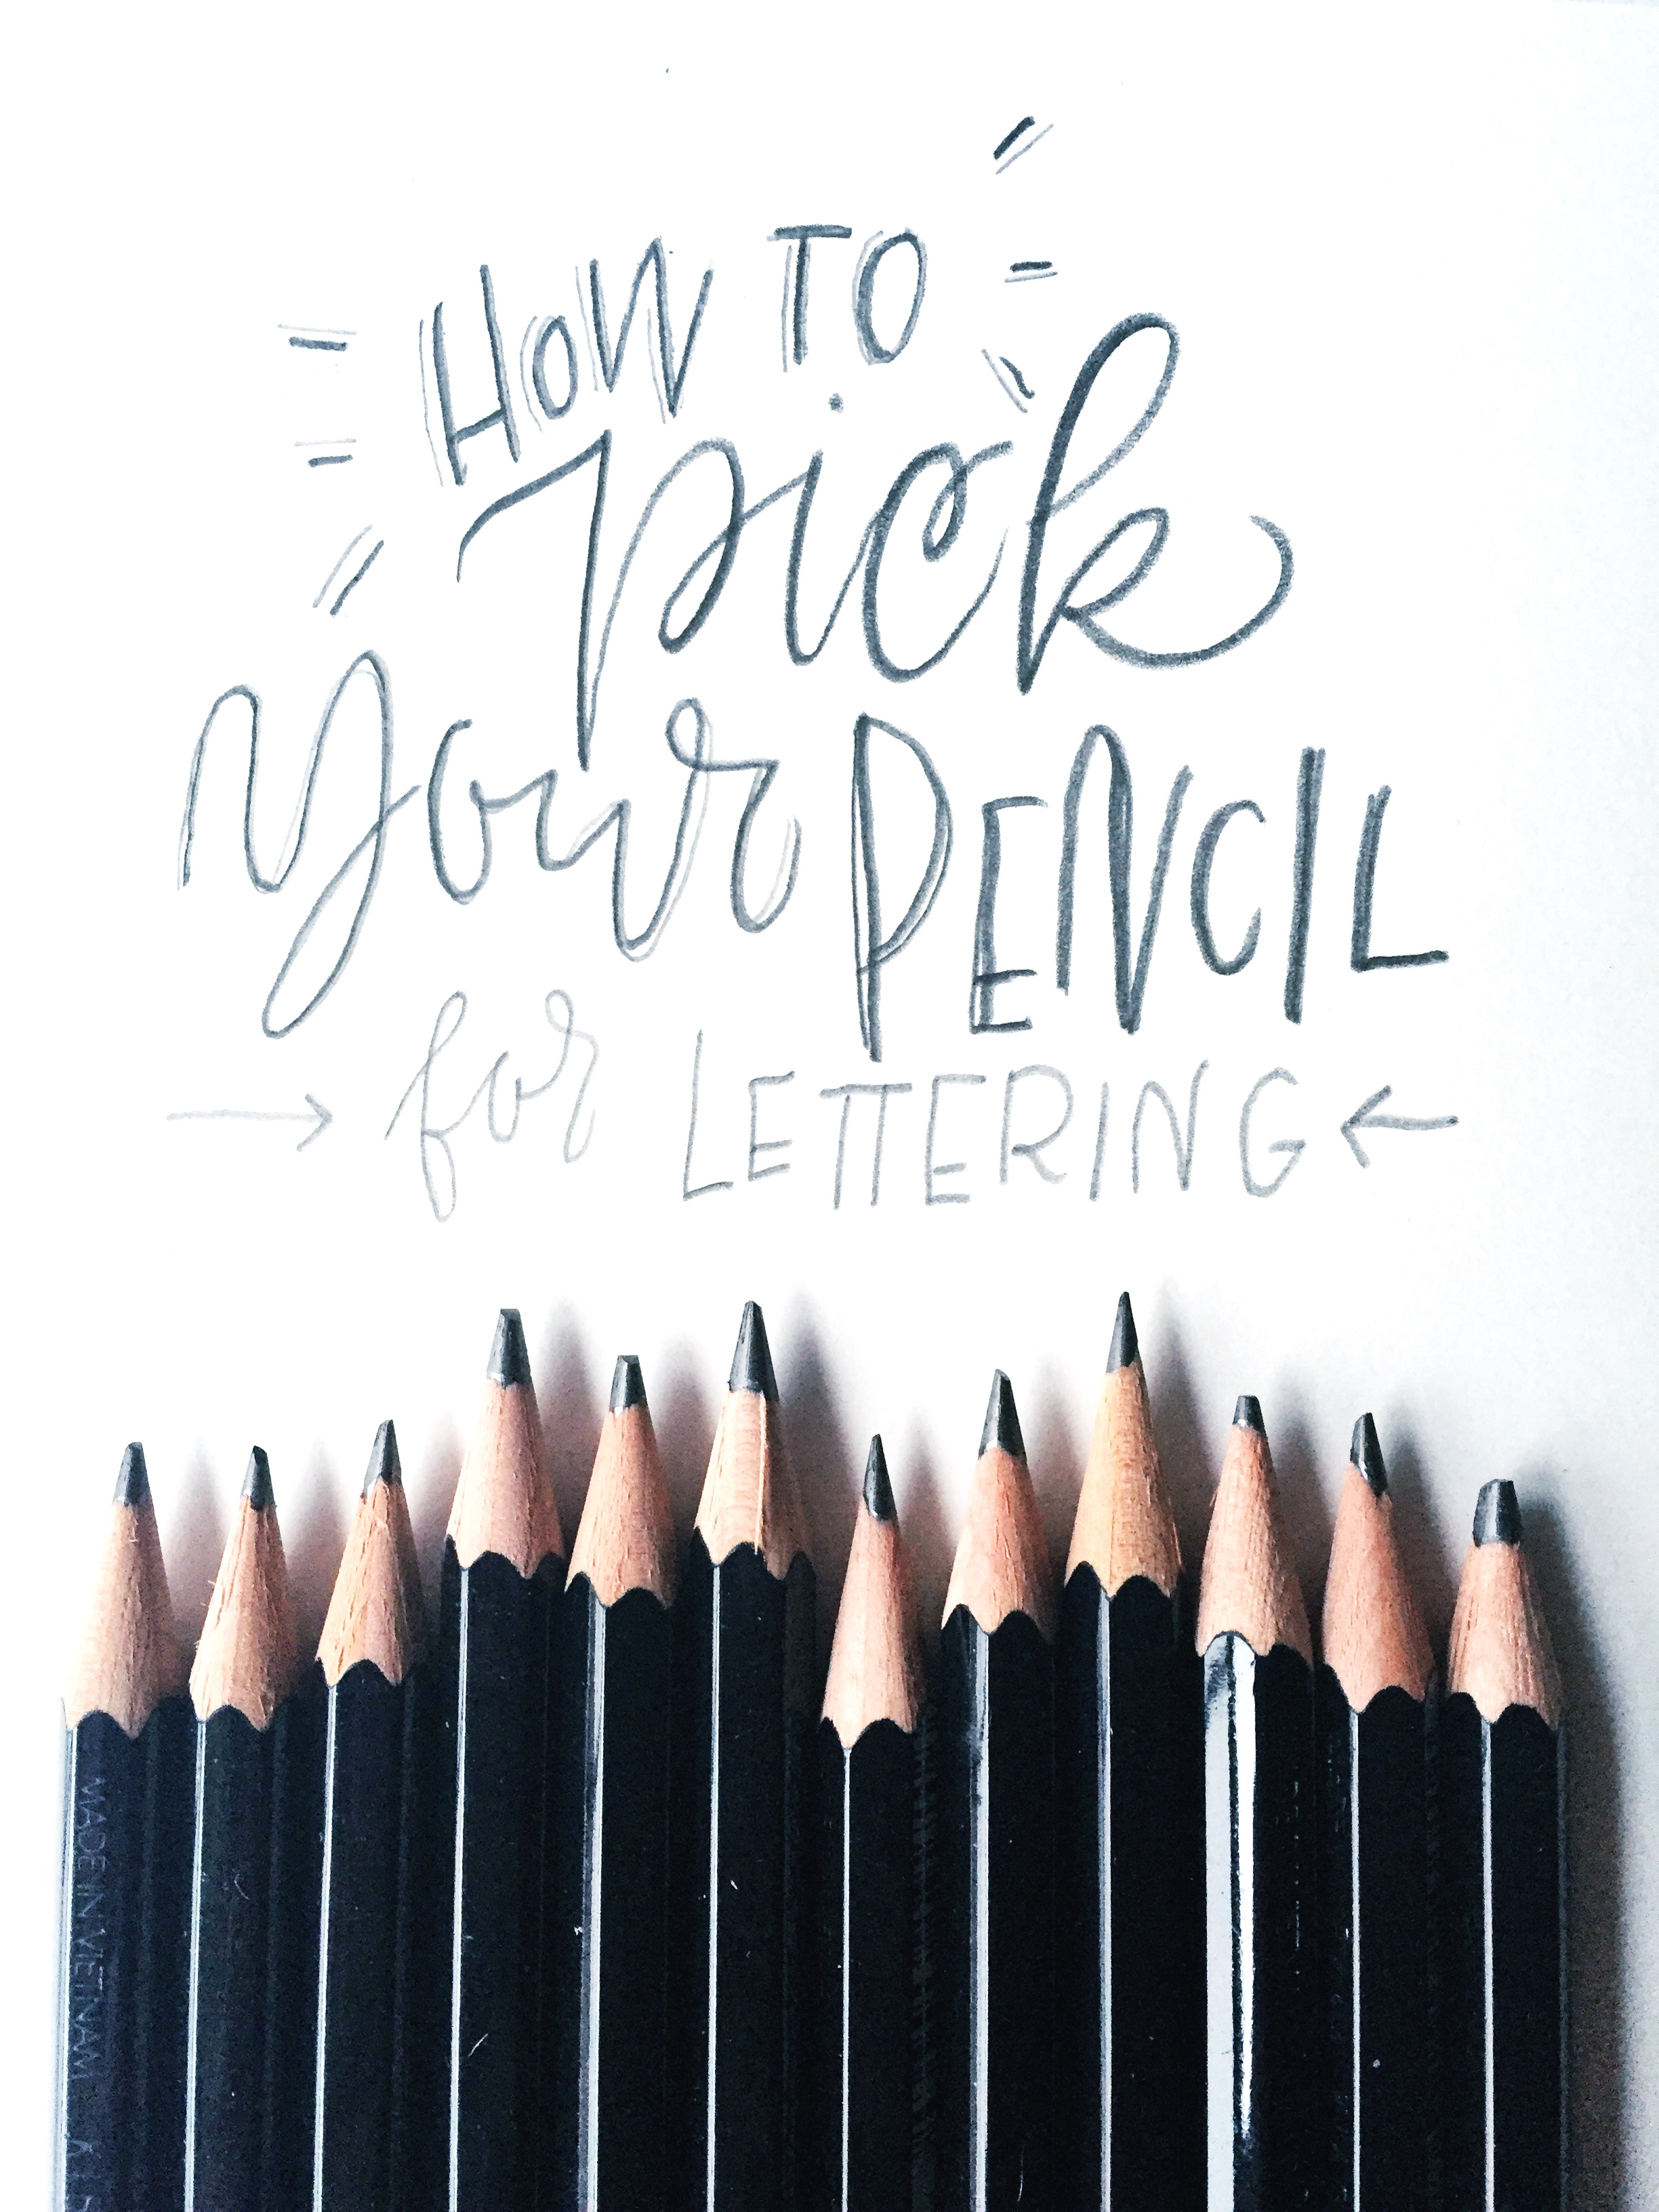 Pencil Lead Hardness: A Guide on How to Pick the Best Pencils